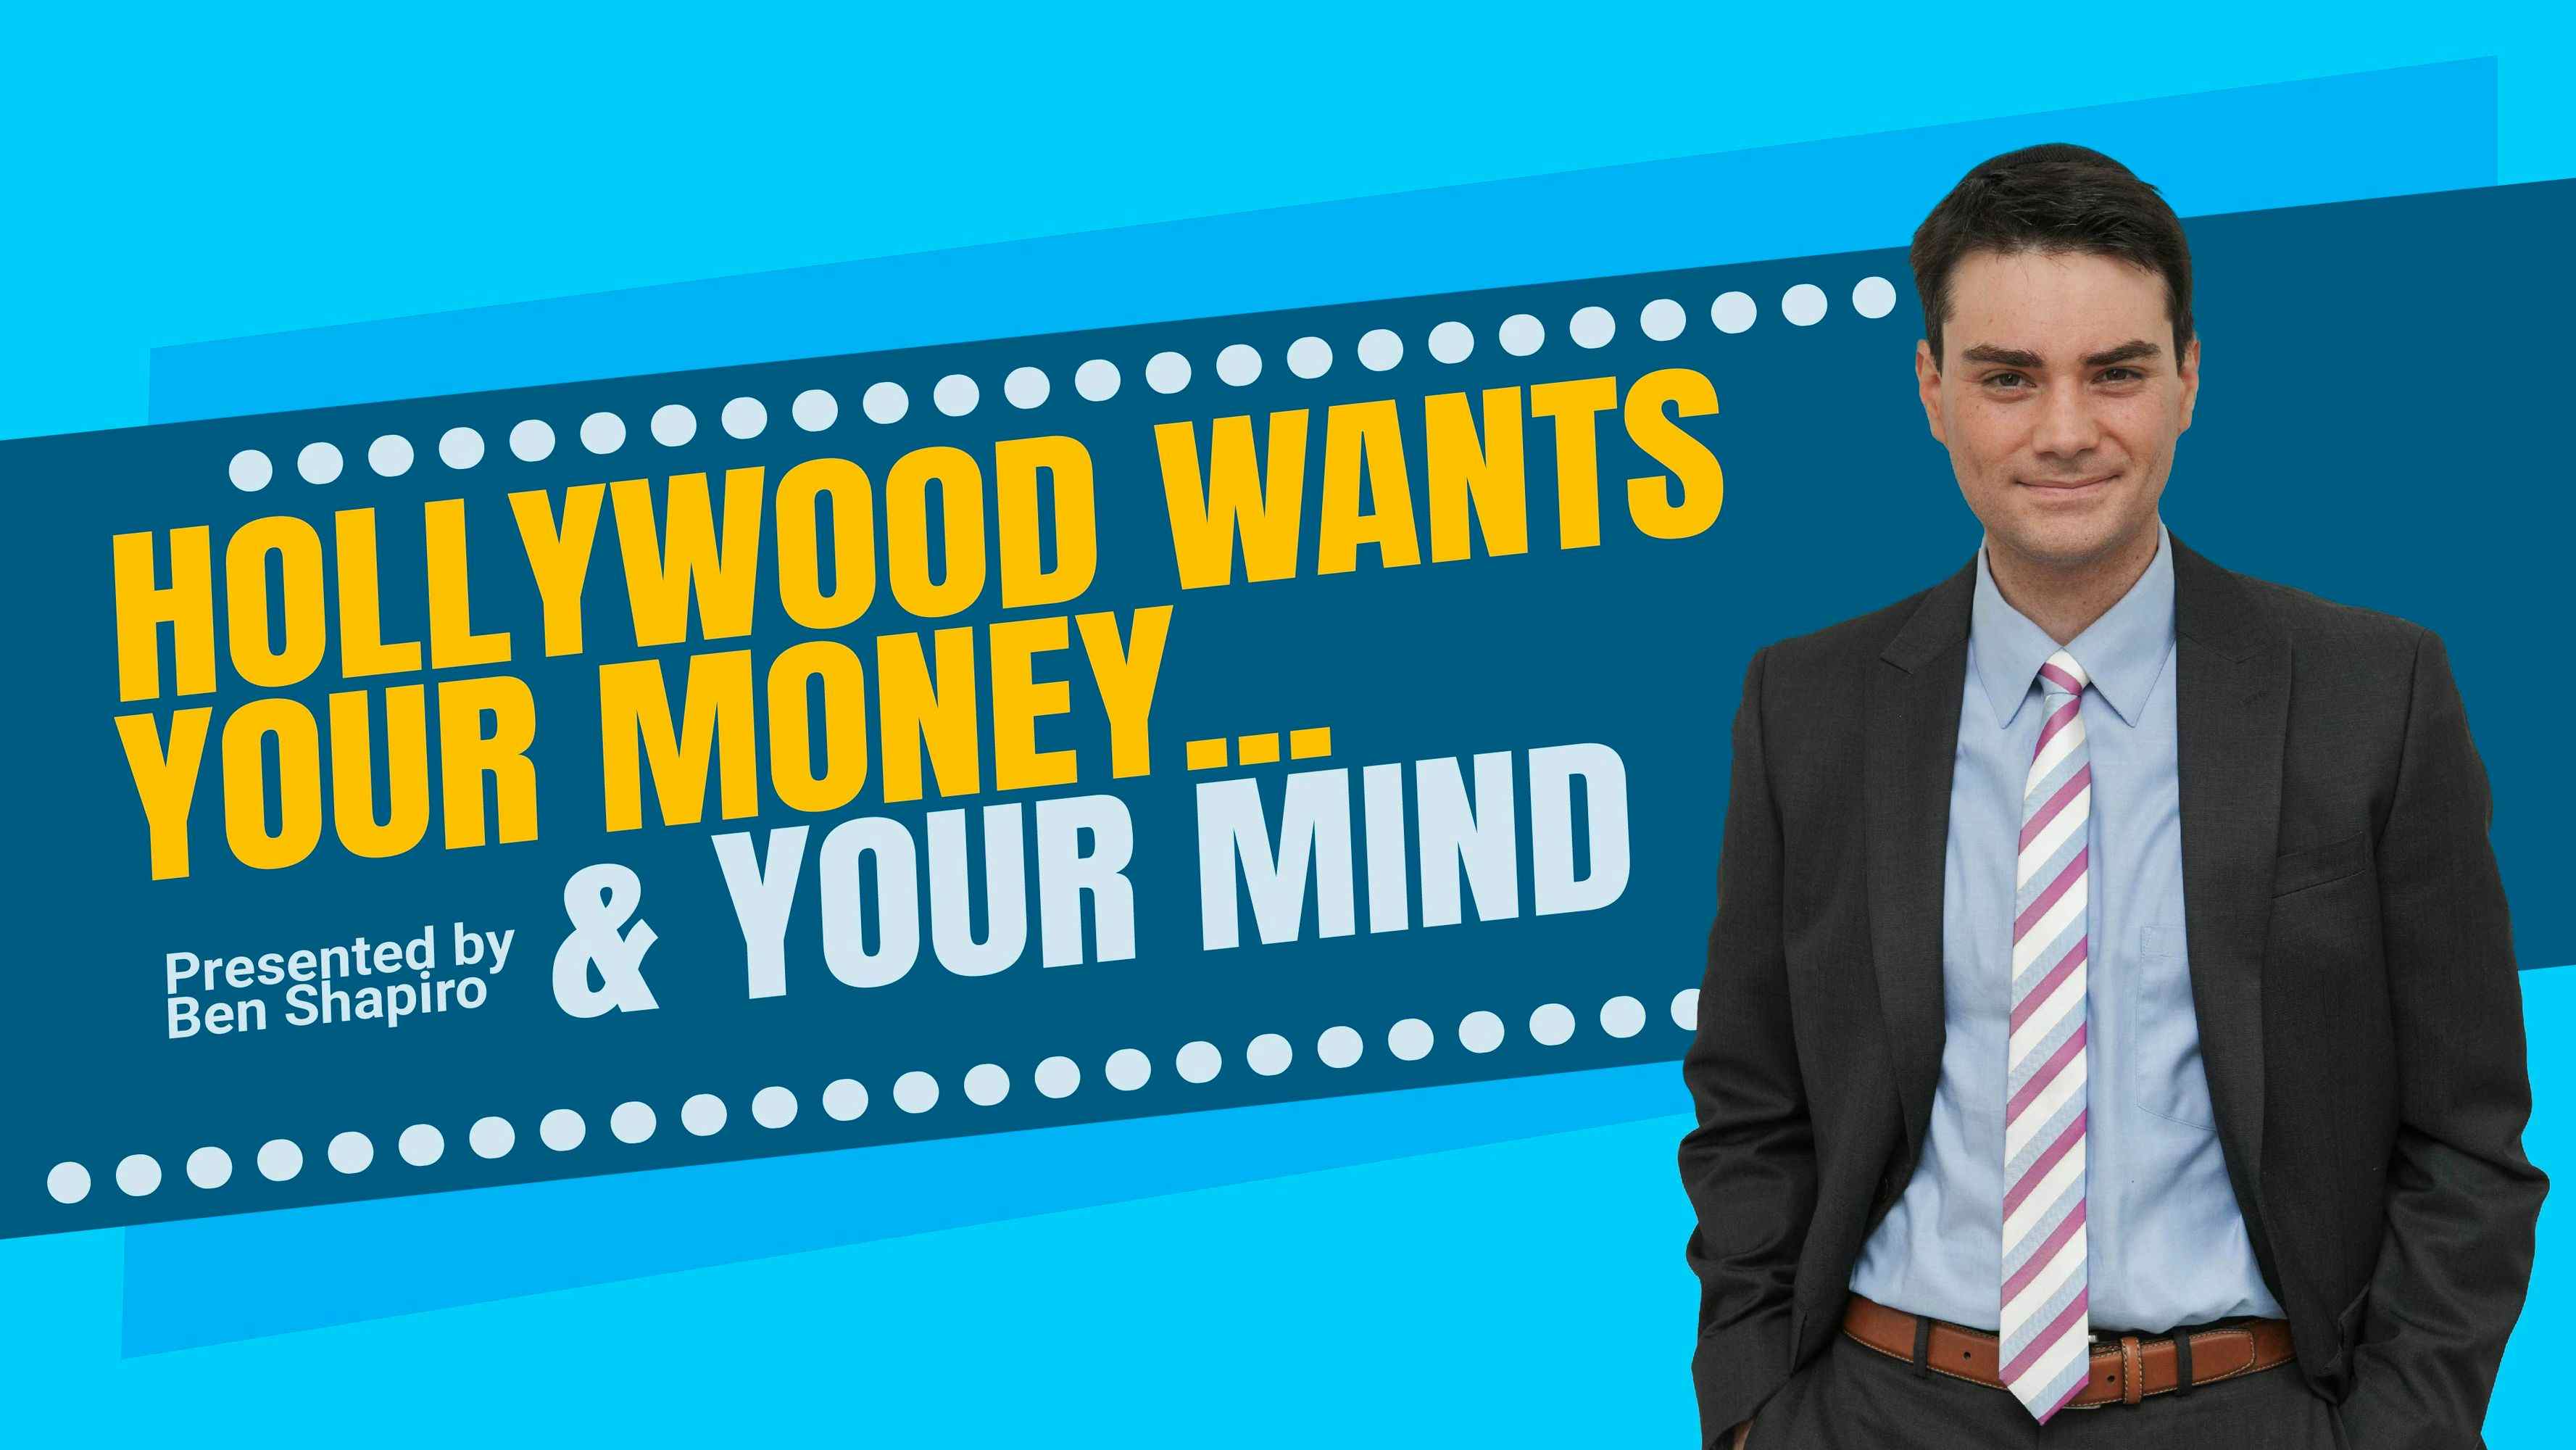 Hollywood Wants Your Money...and Your Mind